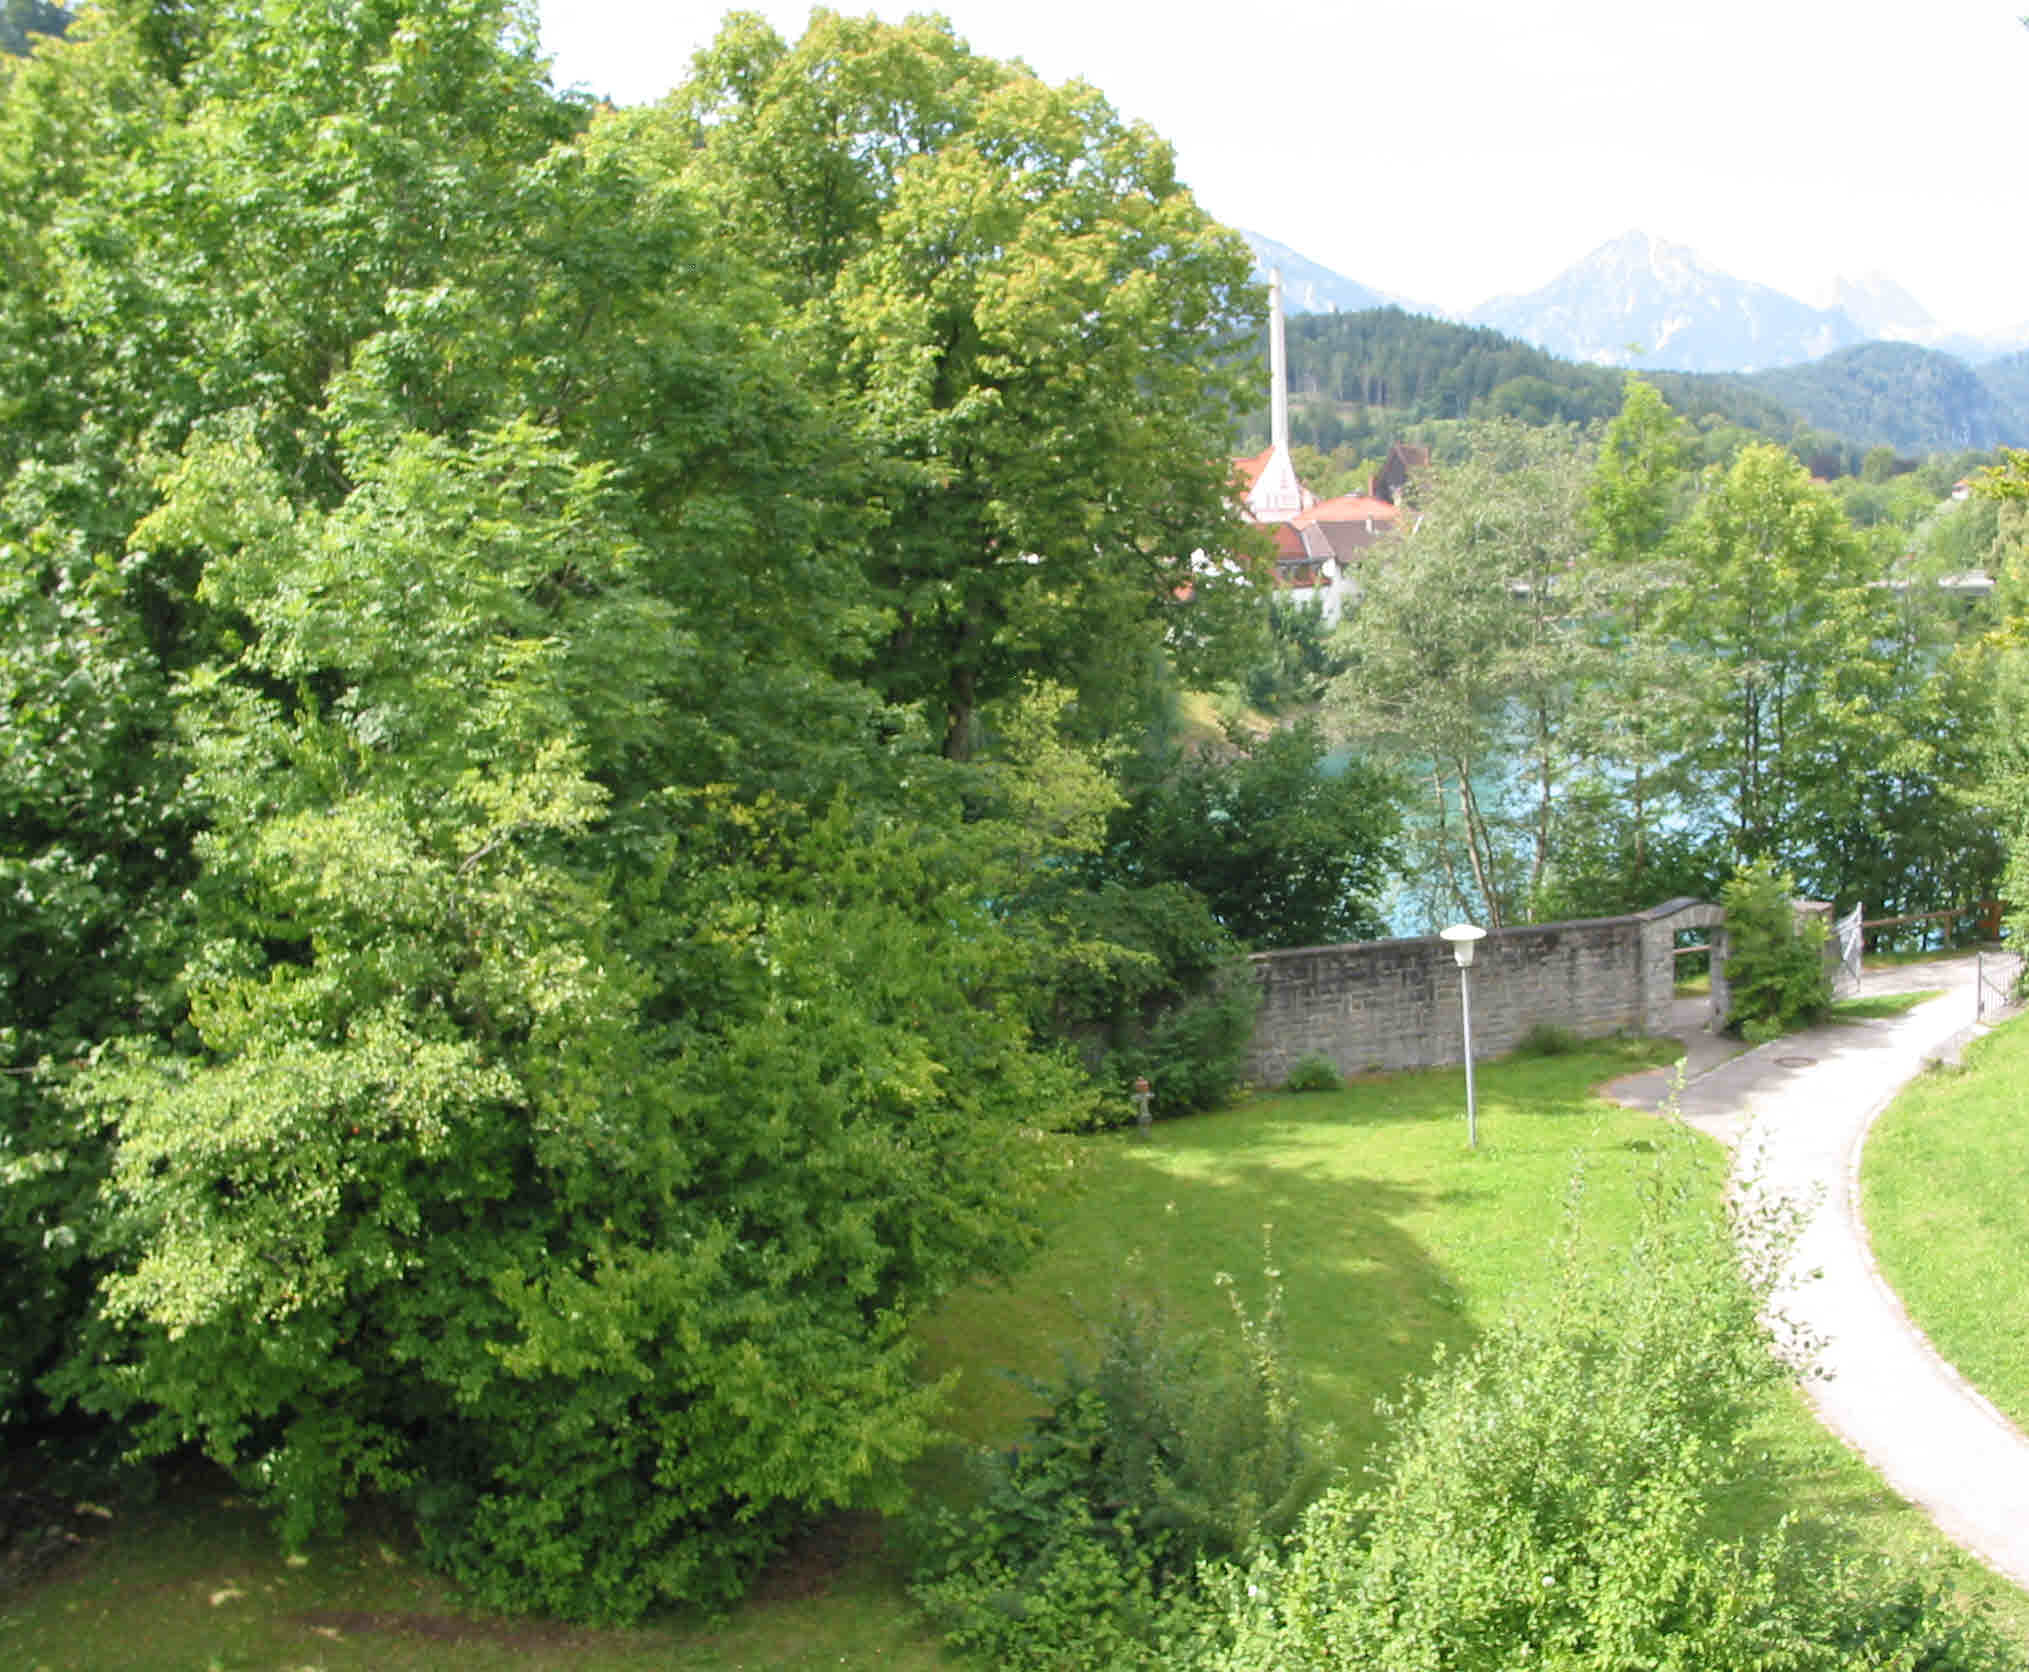 The Clinic garden adjacent to the river Lech